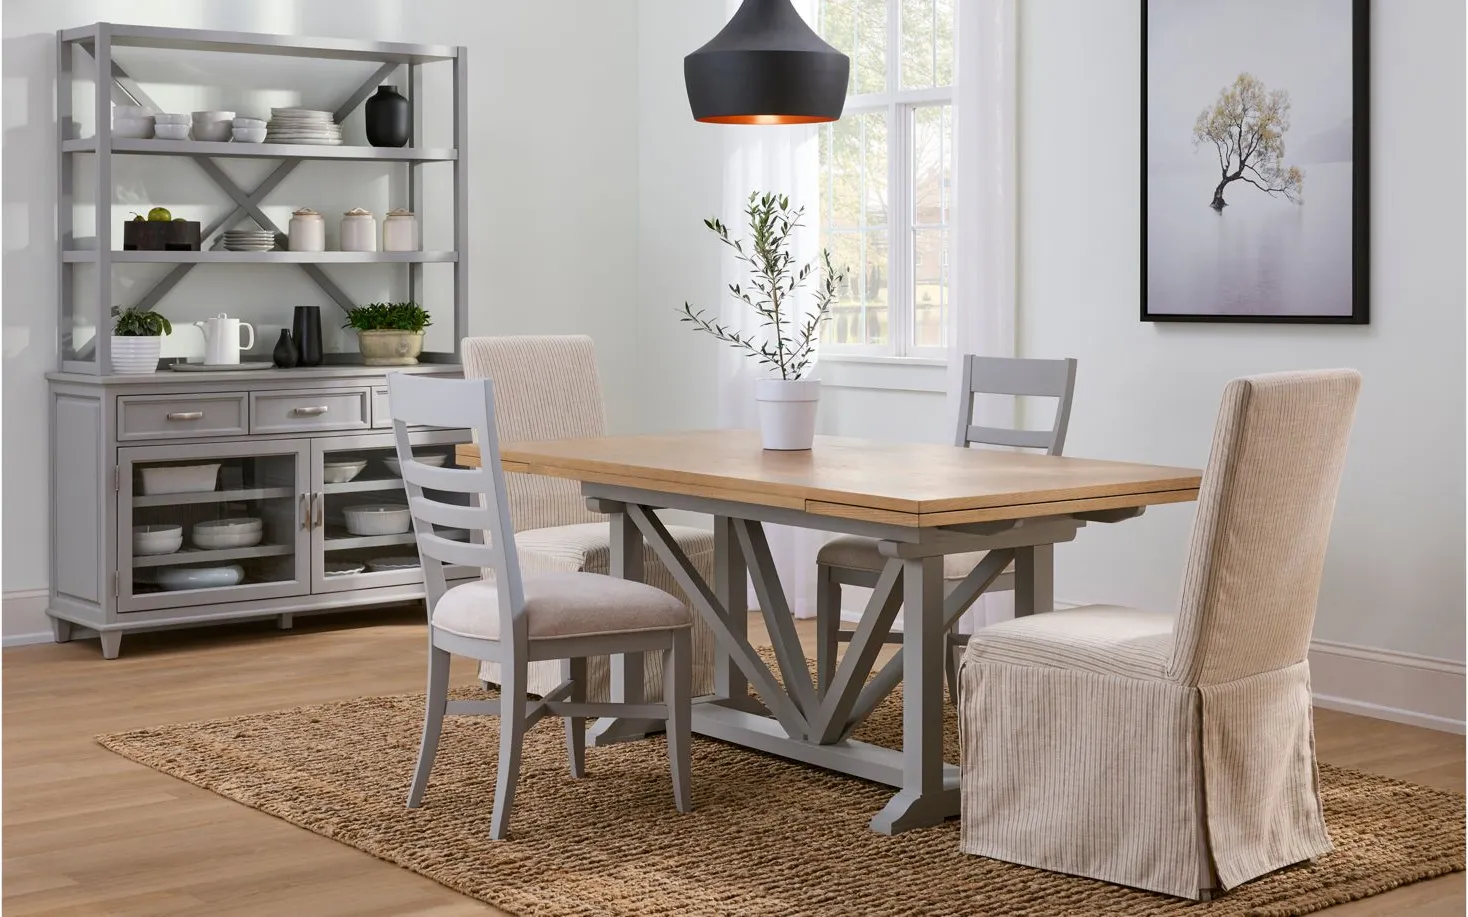 Crew 5-pc. Dining Set in Gray Skies by Riverside Furniture